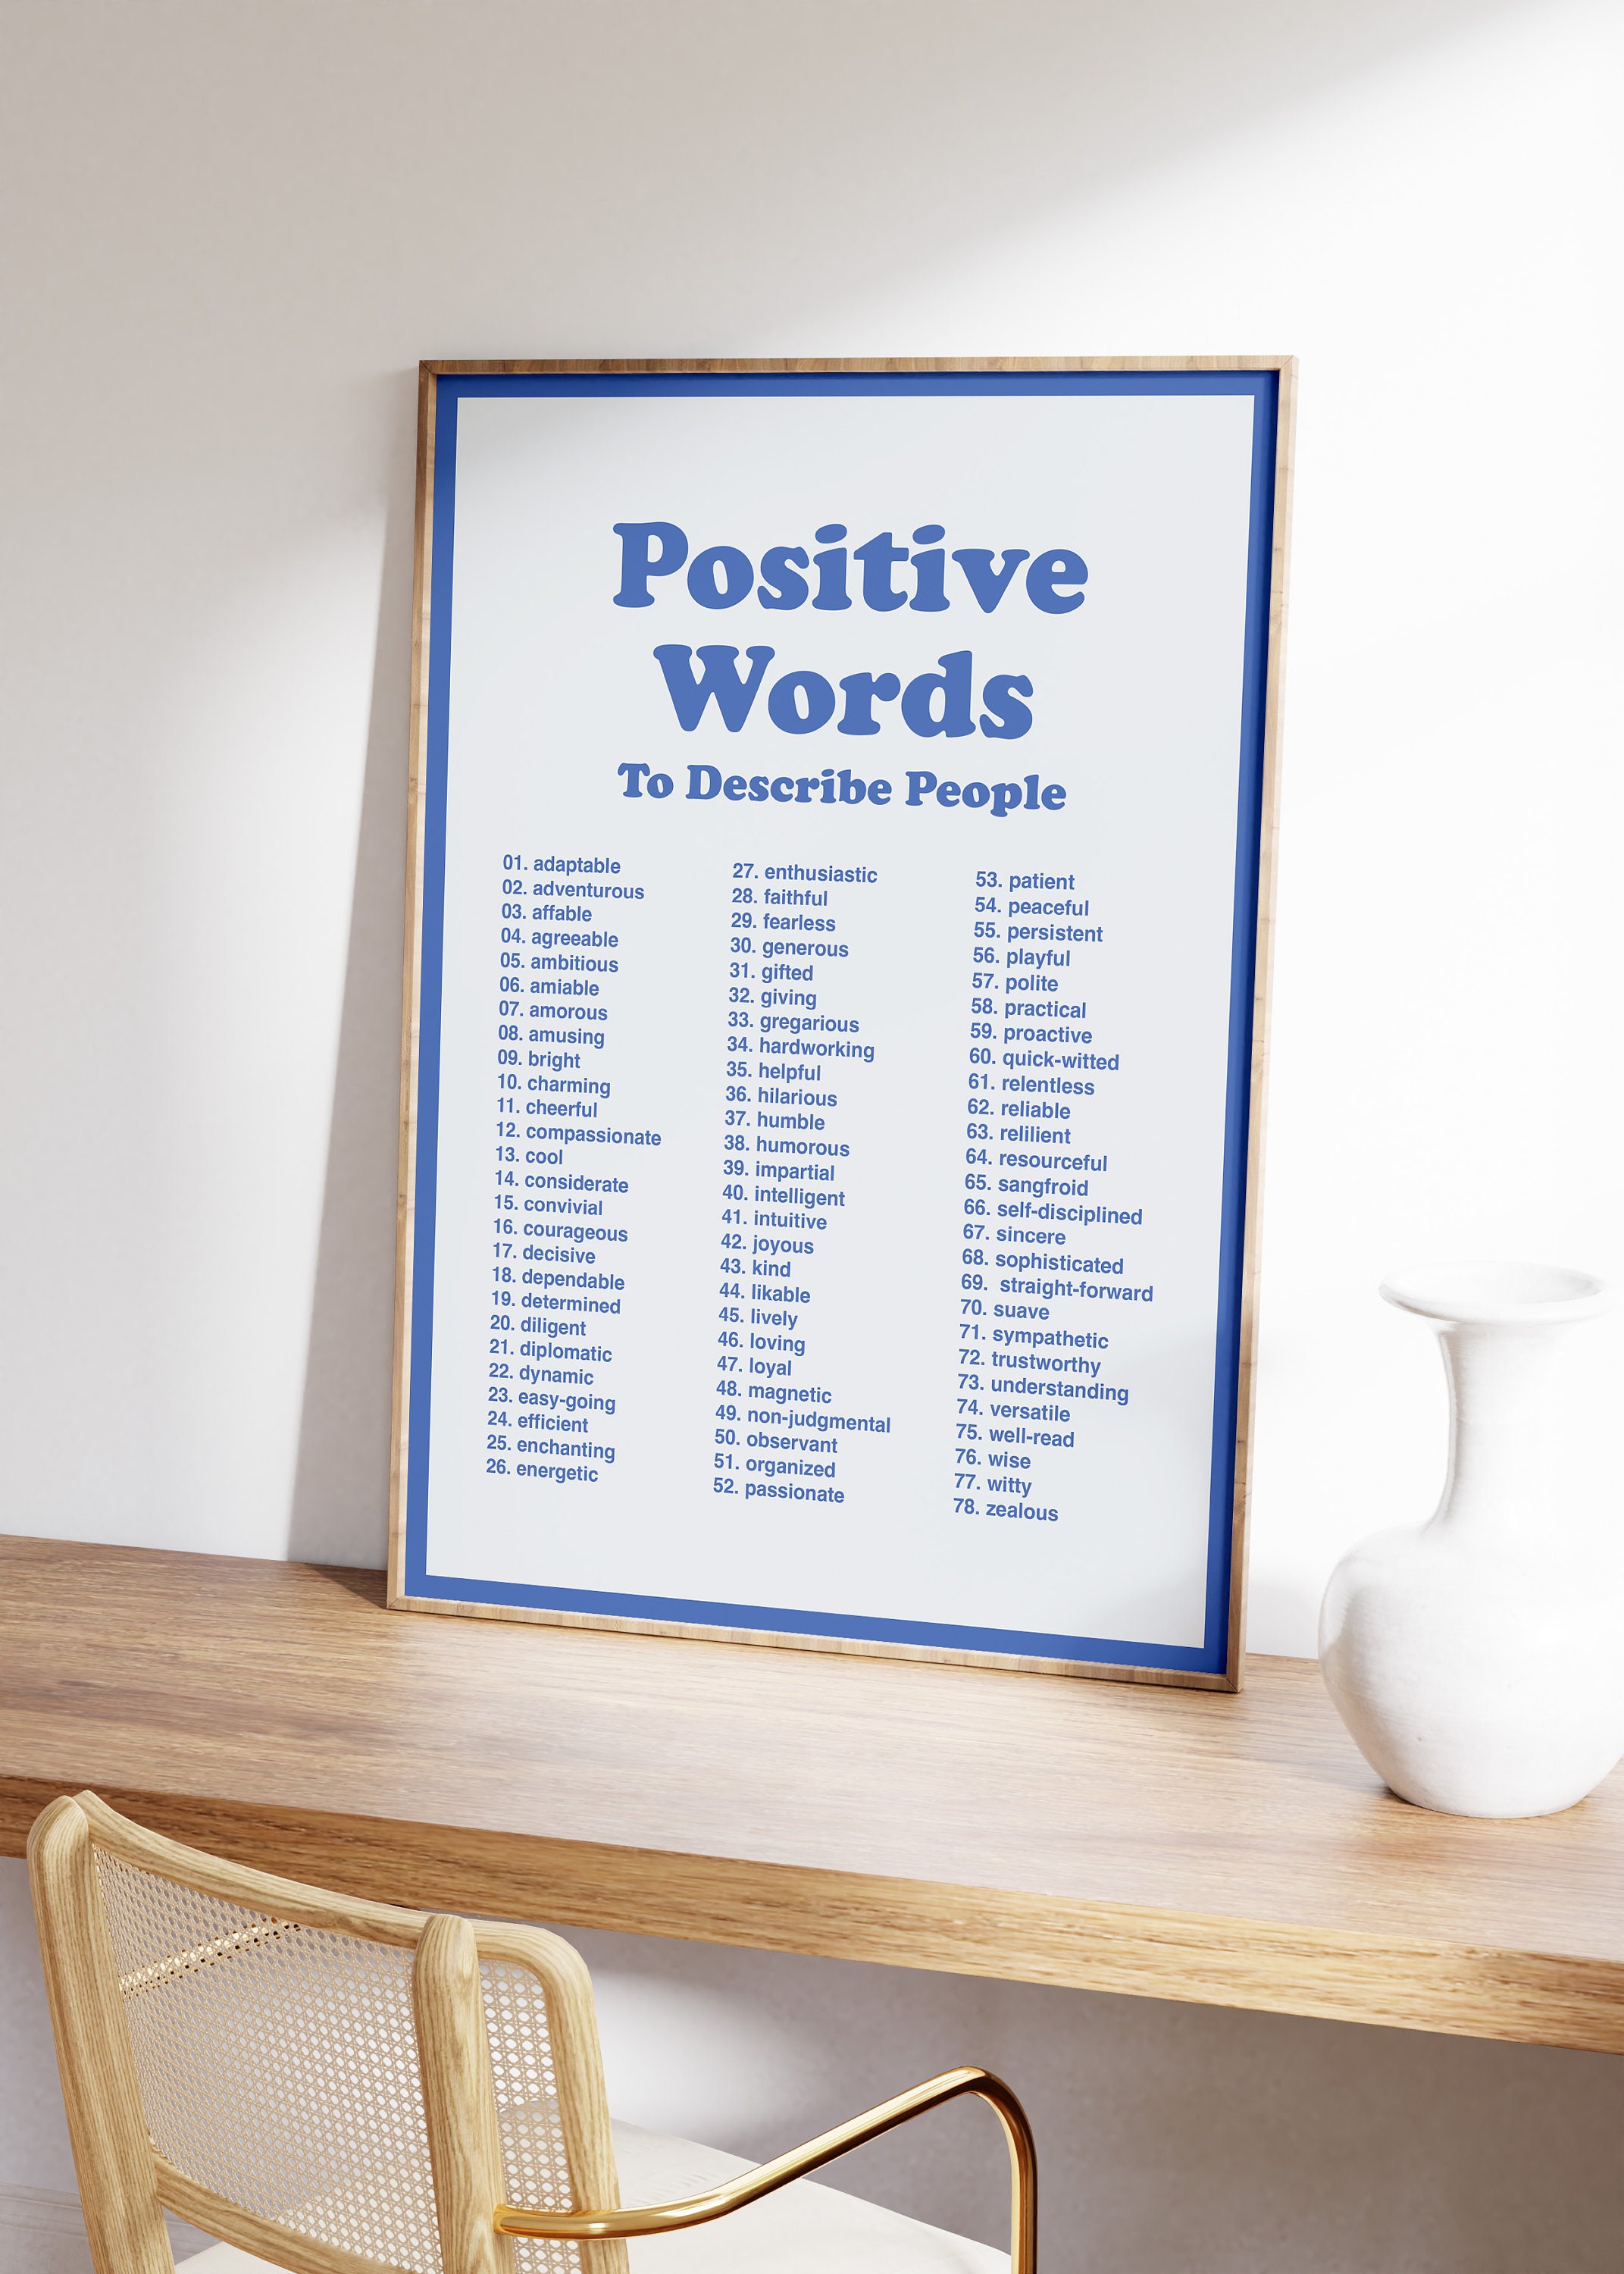 Thank You for Bringing Your Positive Energy, Positive Energy Quote, Office  Wall Art, Office Print, Office Art, Printable Wall Art, Quote Art -   Canada